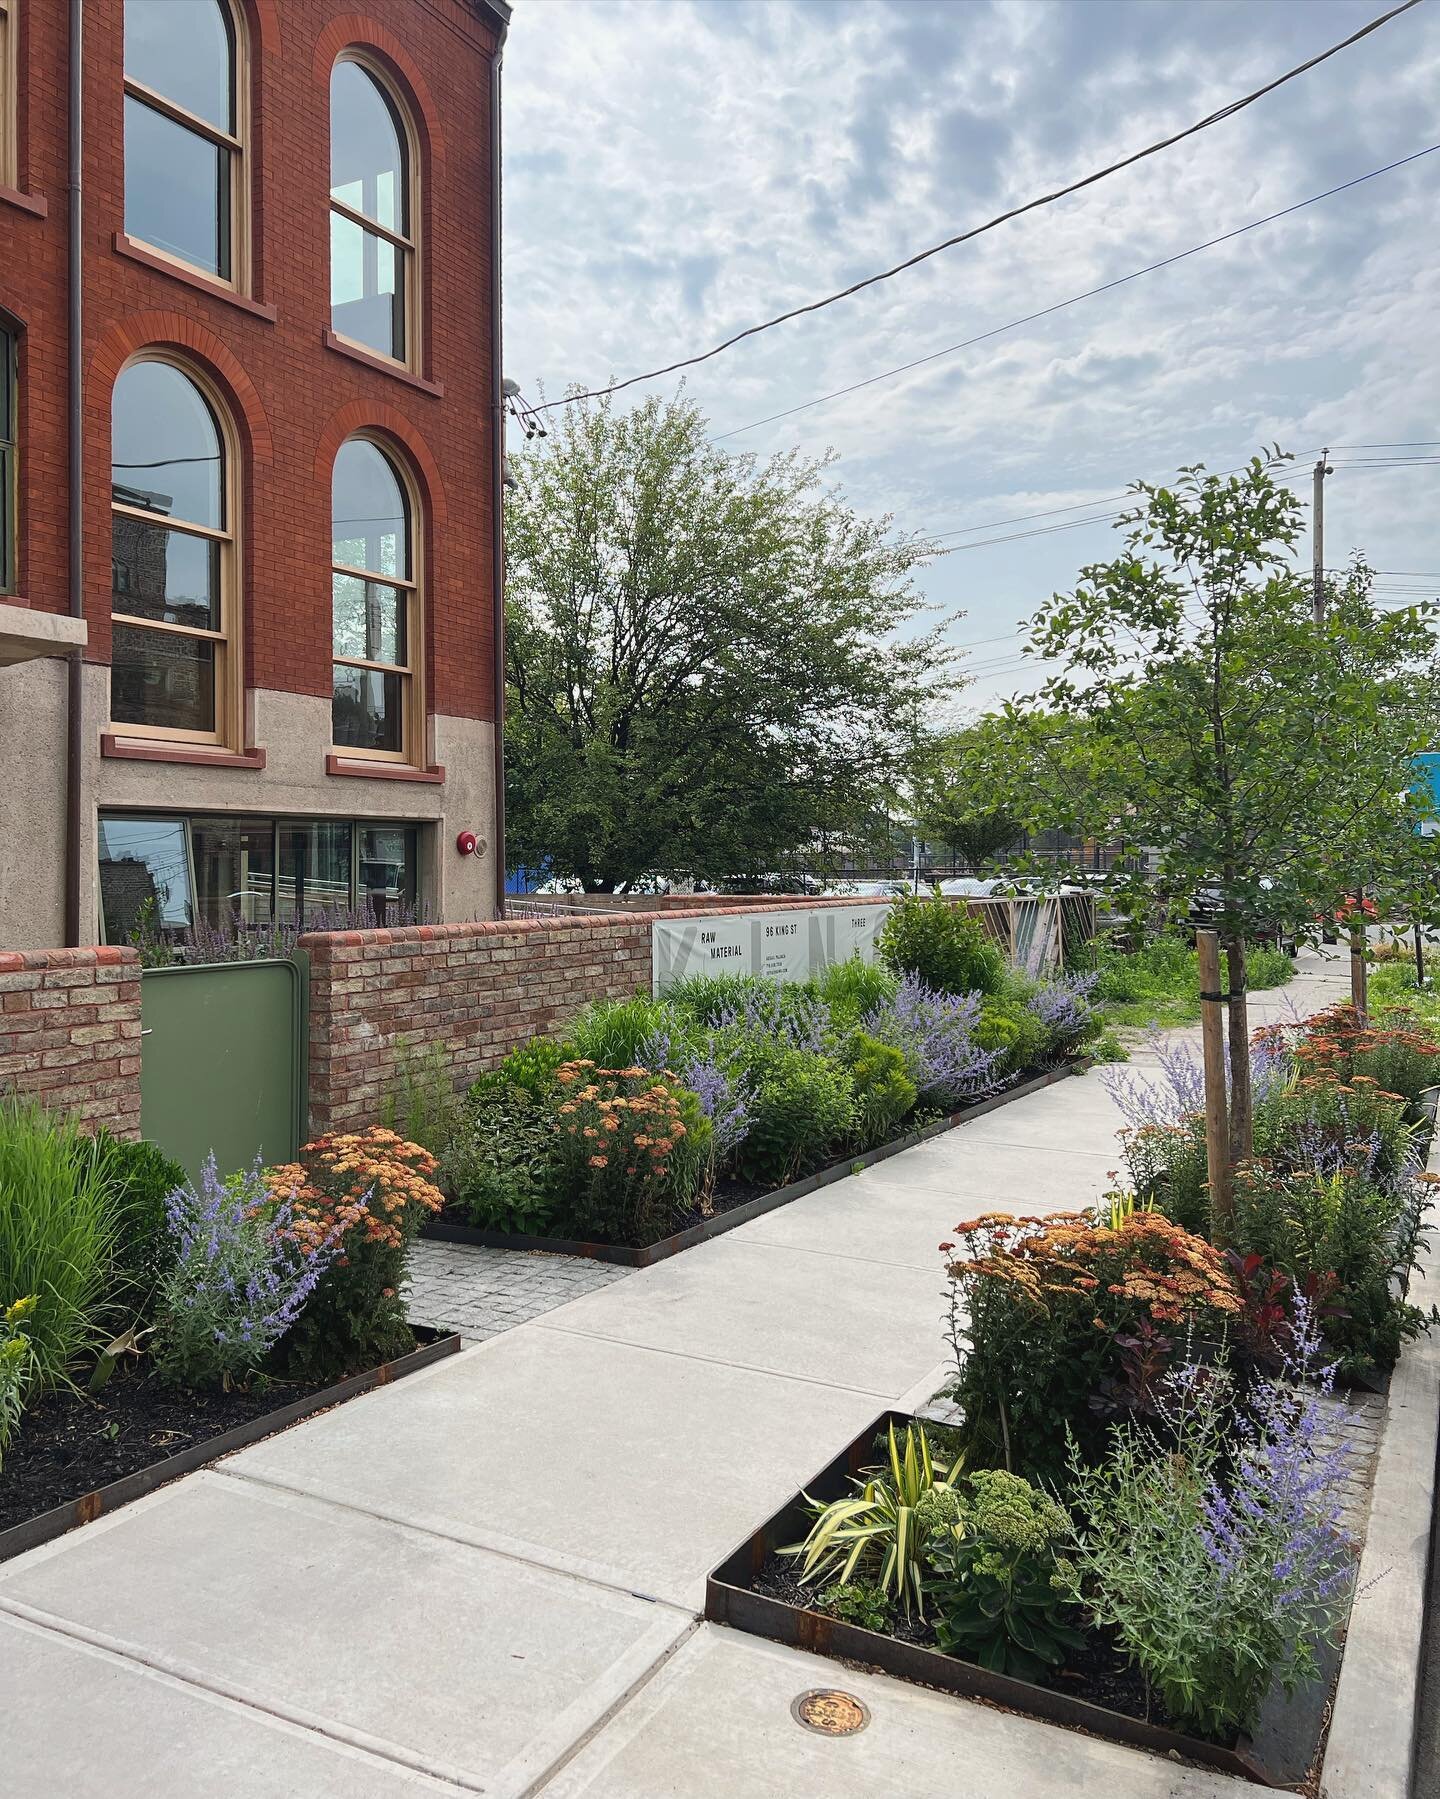 Making #Brooklyn streets beautiful, one sidewalk at a time :-)
.
@dimasterystudio designed and landscaped all outdoor areas of this gorgeous new development in our home neighborhood #RedHookBrooklyn 
.
.
.
.
.
.
.
#nativeplants 
#dimastery #dimastery